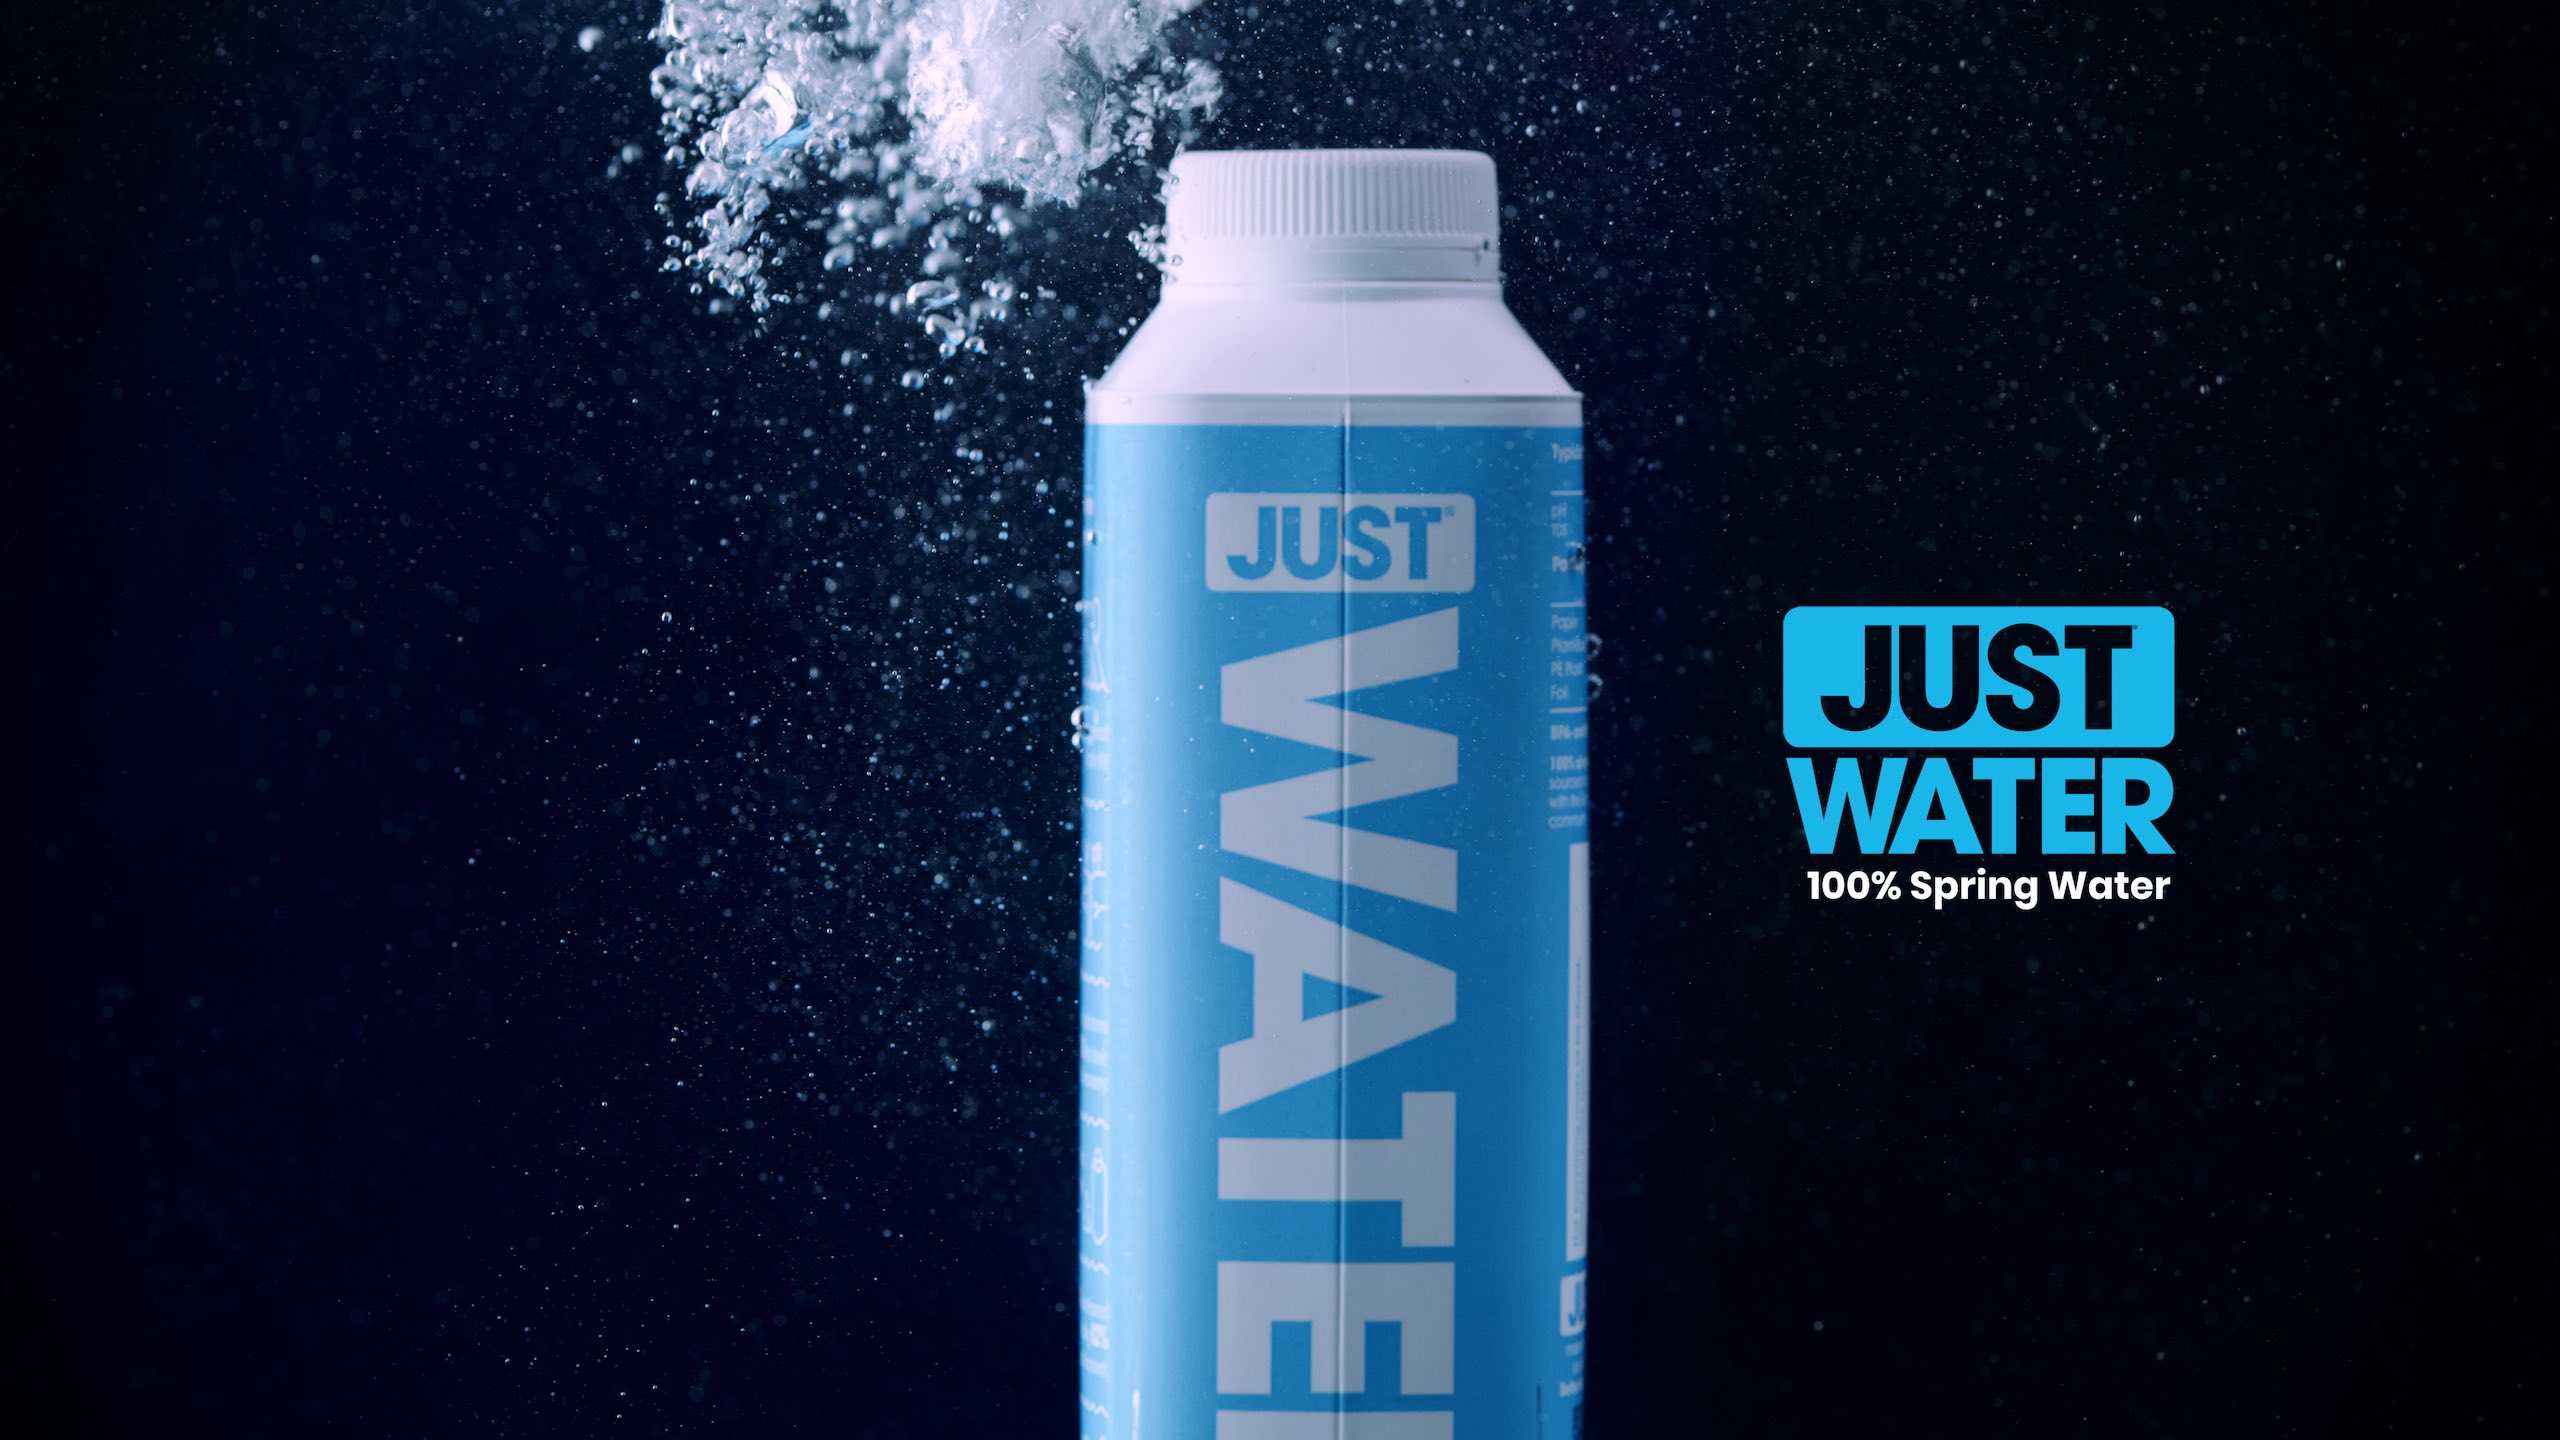 Just water video ad